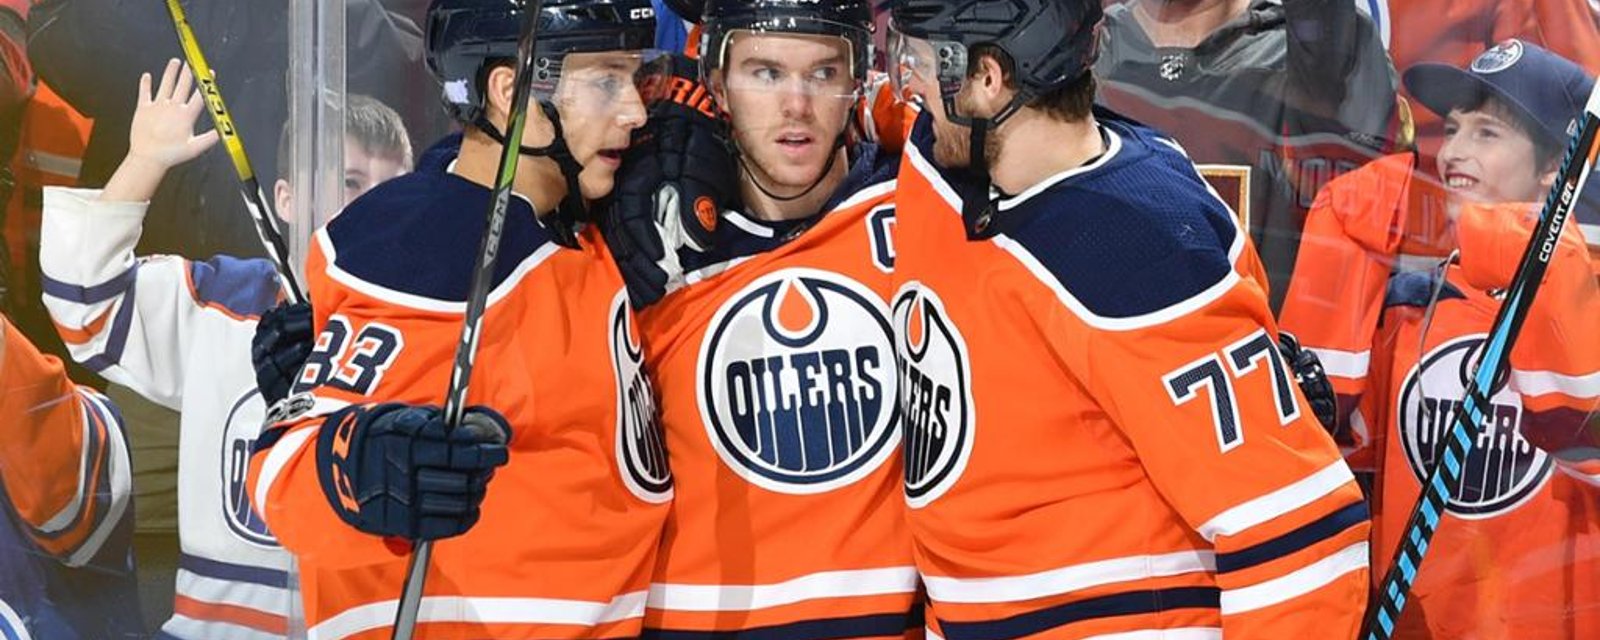 Oilers have found the replacement for Oscar Klembom